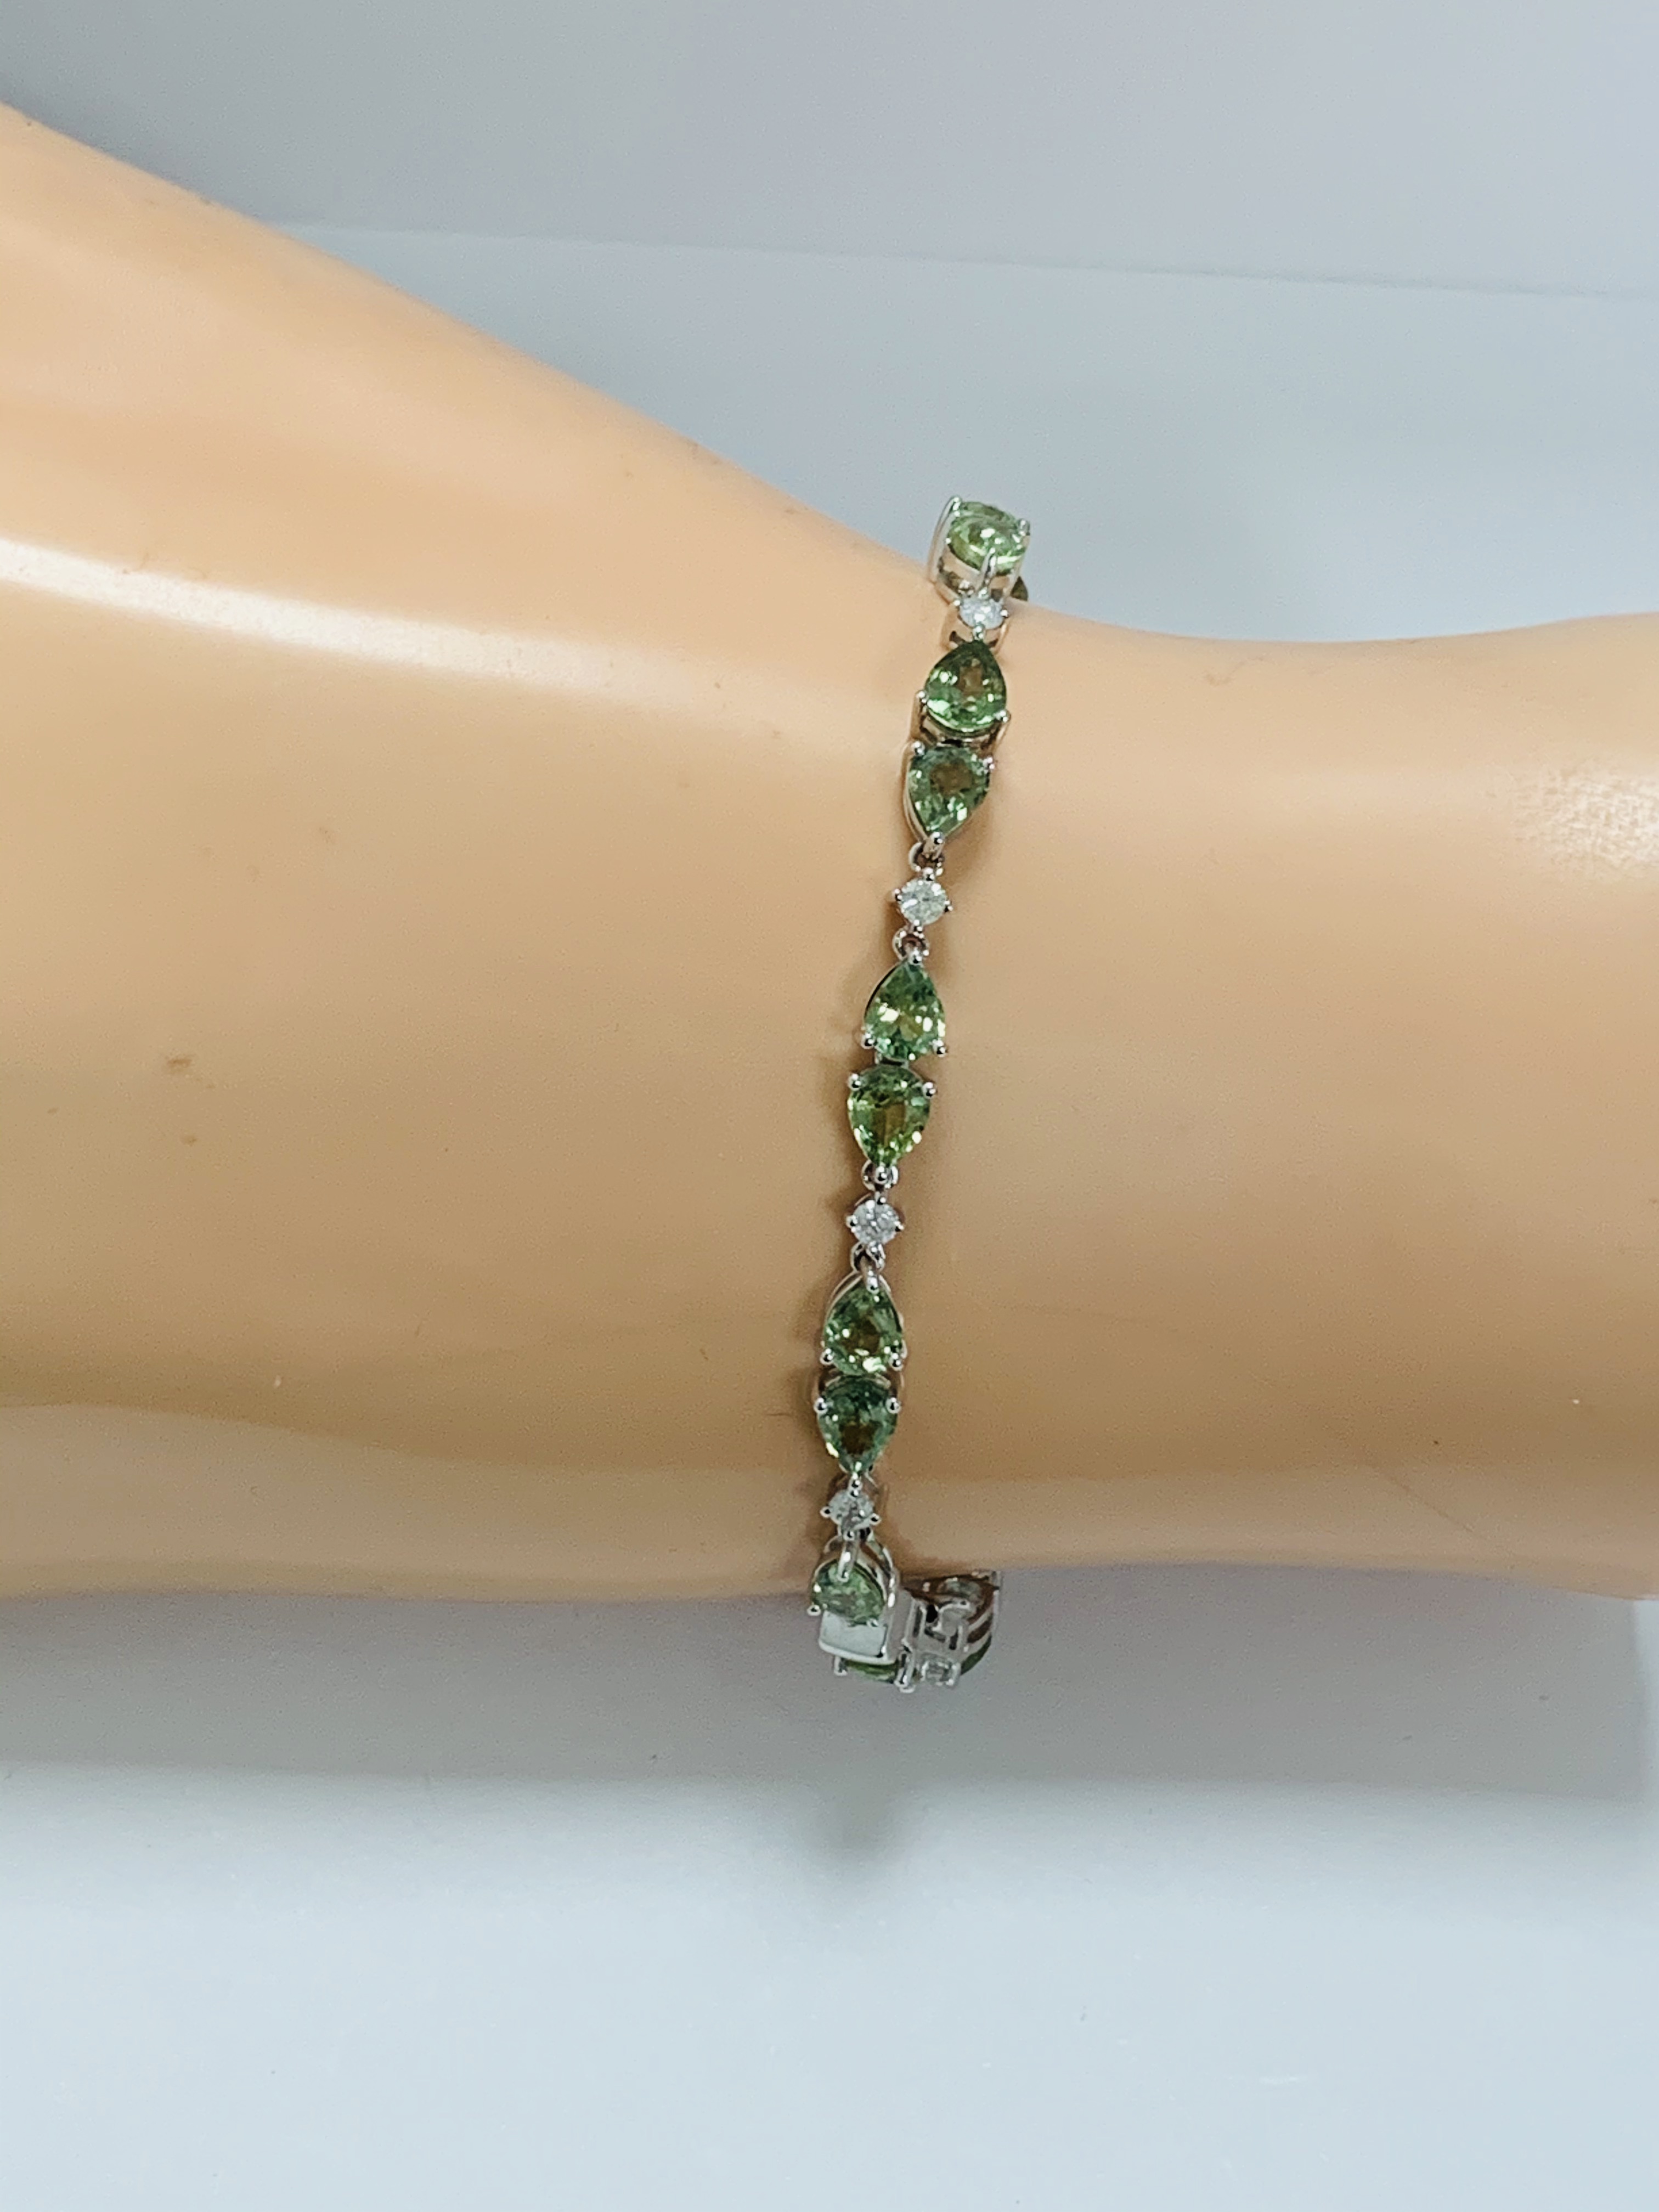 14ct White Gold Sapphire and Diamond bracelet featuring, 22 pear cut, light green Sapphires (9.05ct - Image 6 of 12